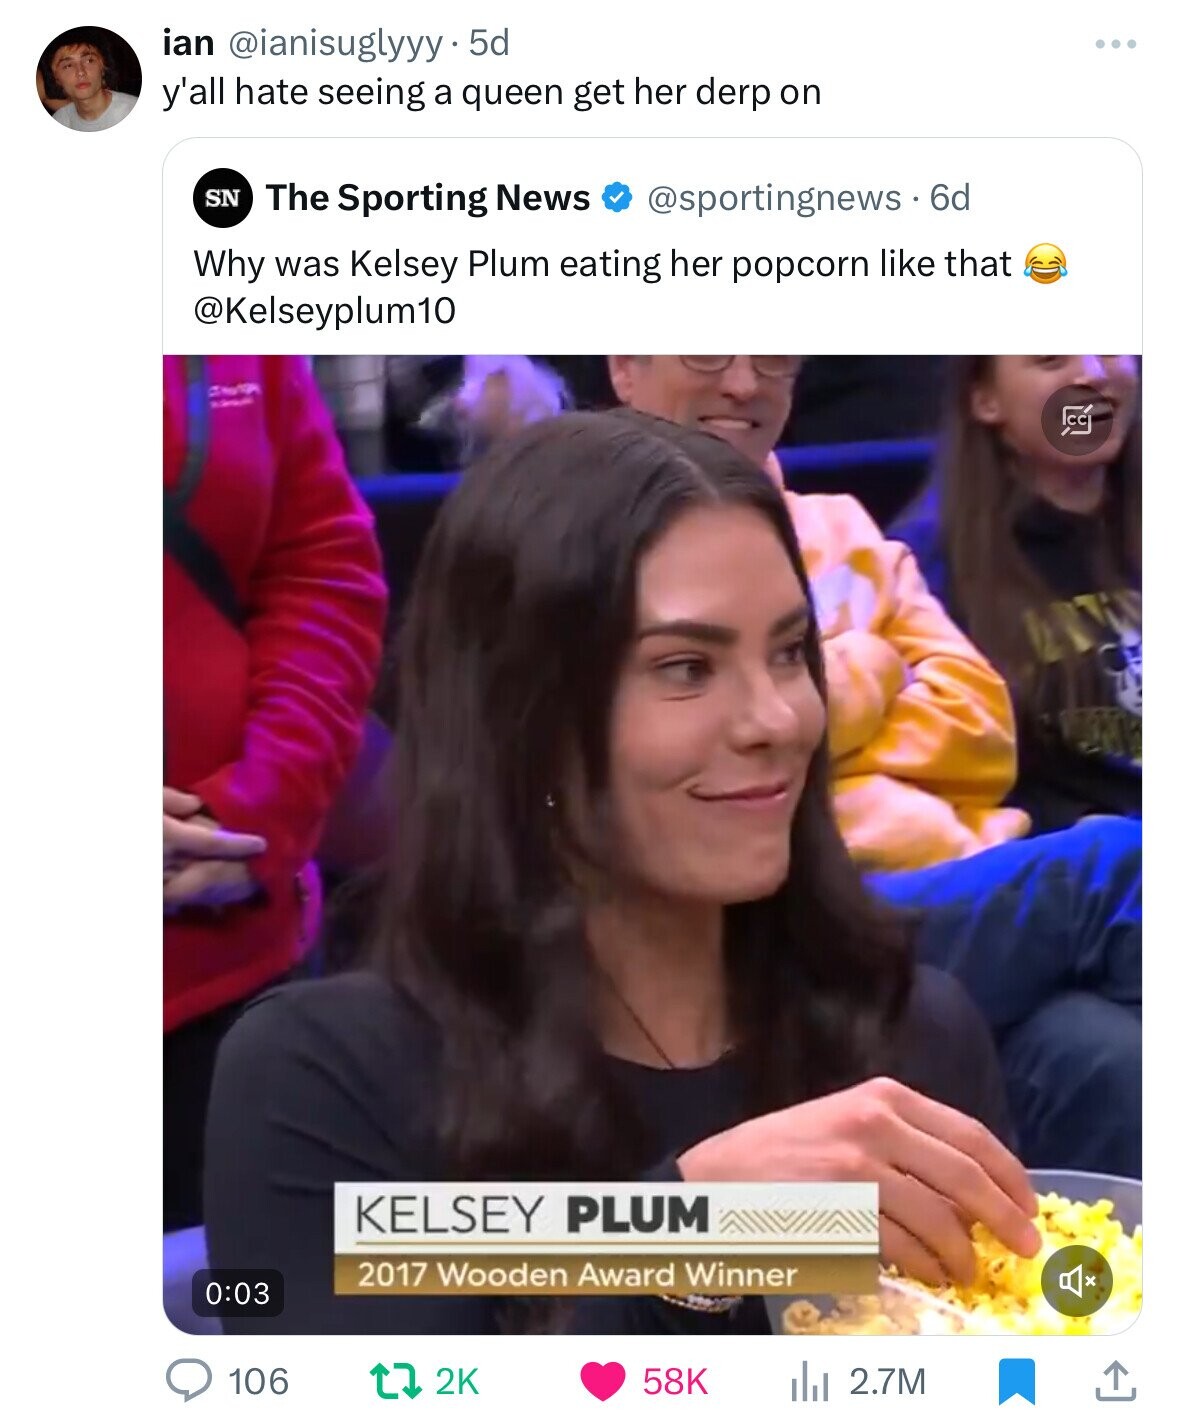 ian @ianisuglyyy 5d y'all hate seeing a queen get her derp on SN The Sporting News @sportingnews 6d Why was Kelsey Plum eating her popcorn like that @Kelseyplum10 CC KELSEY PLUM 2017 Wooden Award Winner 0:03 106 2K 58K 2.7M 